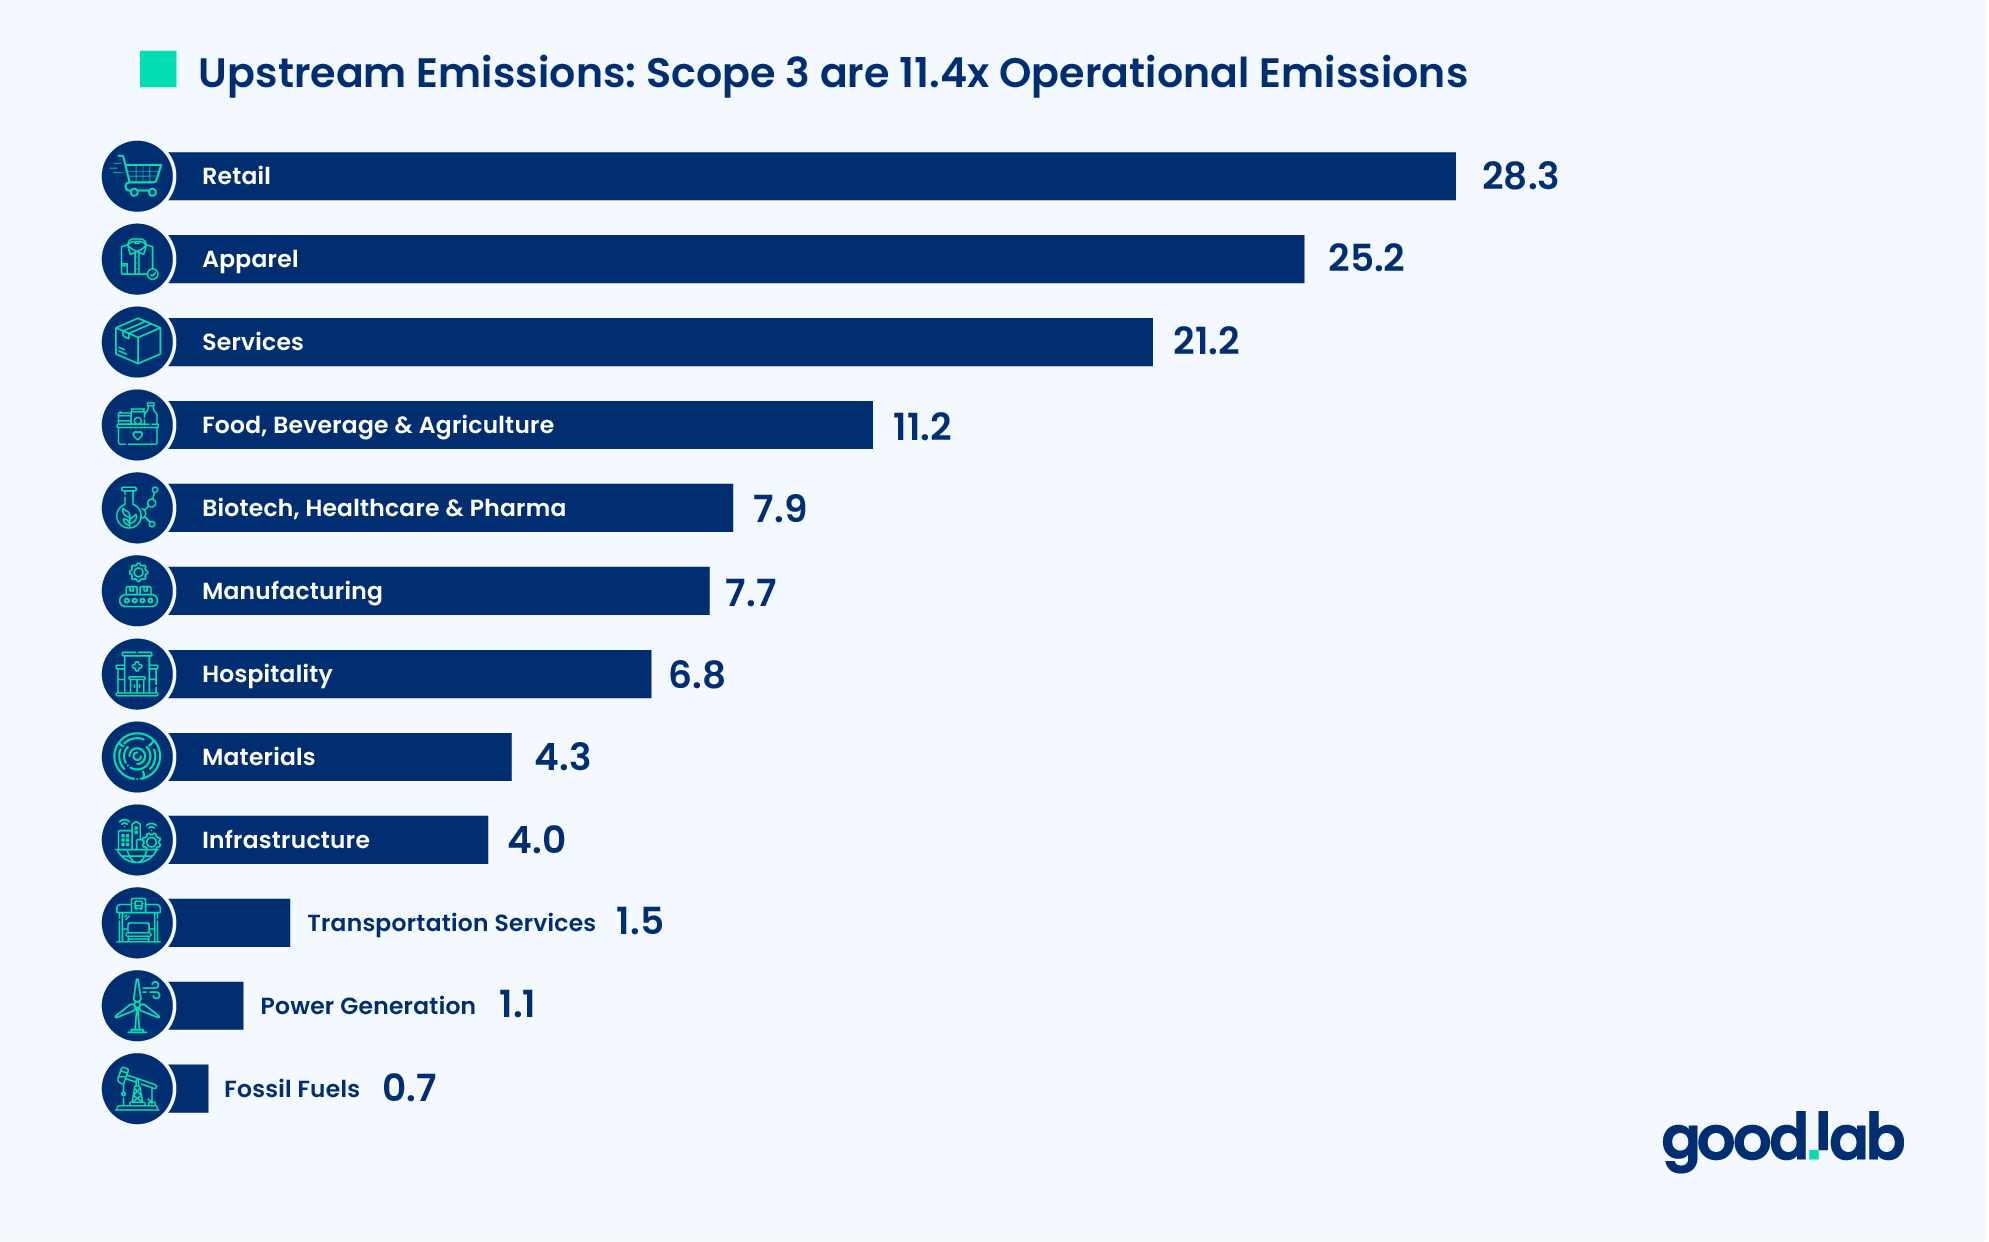 A graph showing how much Scope 3 emissions are in each sector